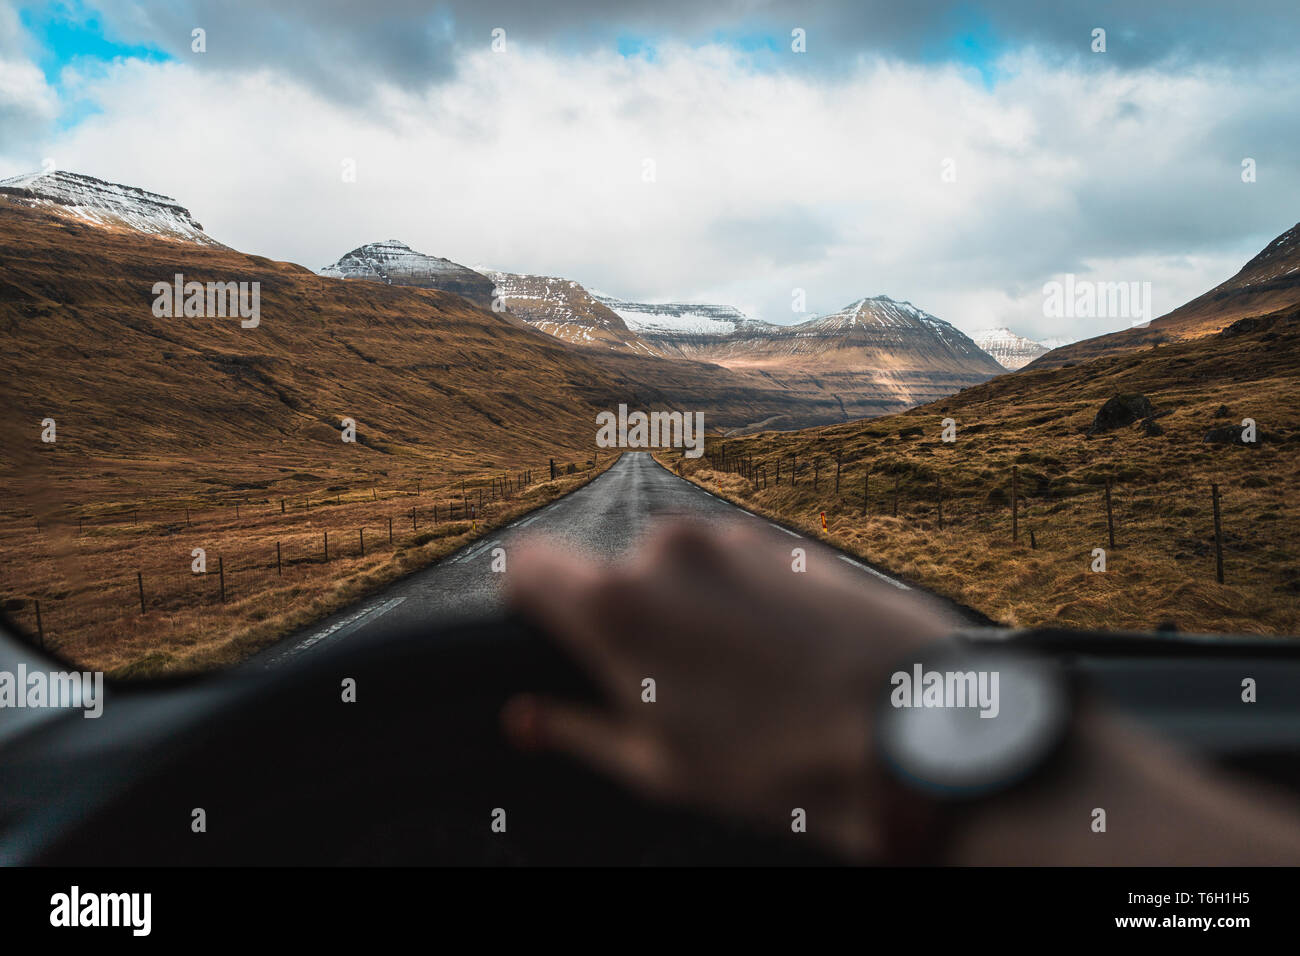 Driver's perspective from the inside of a car during a road trip through snow-covered valleys on the Faroe Islands with scenic views (Faroe Islands) Stock Photo